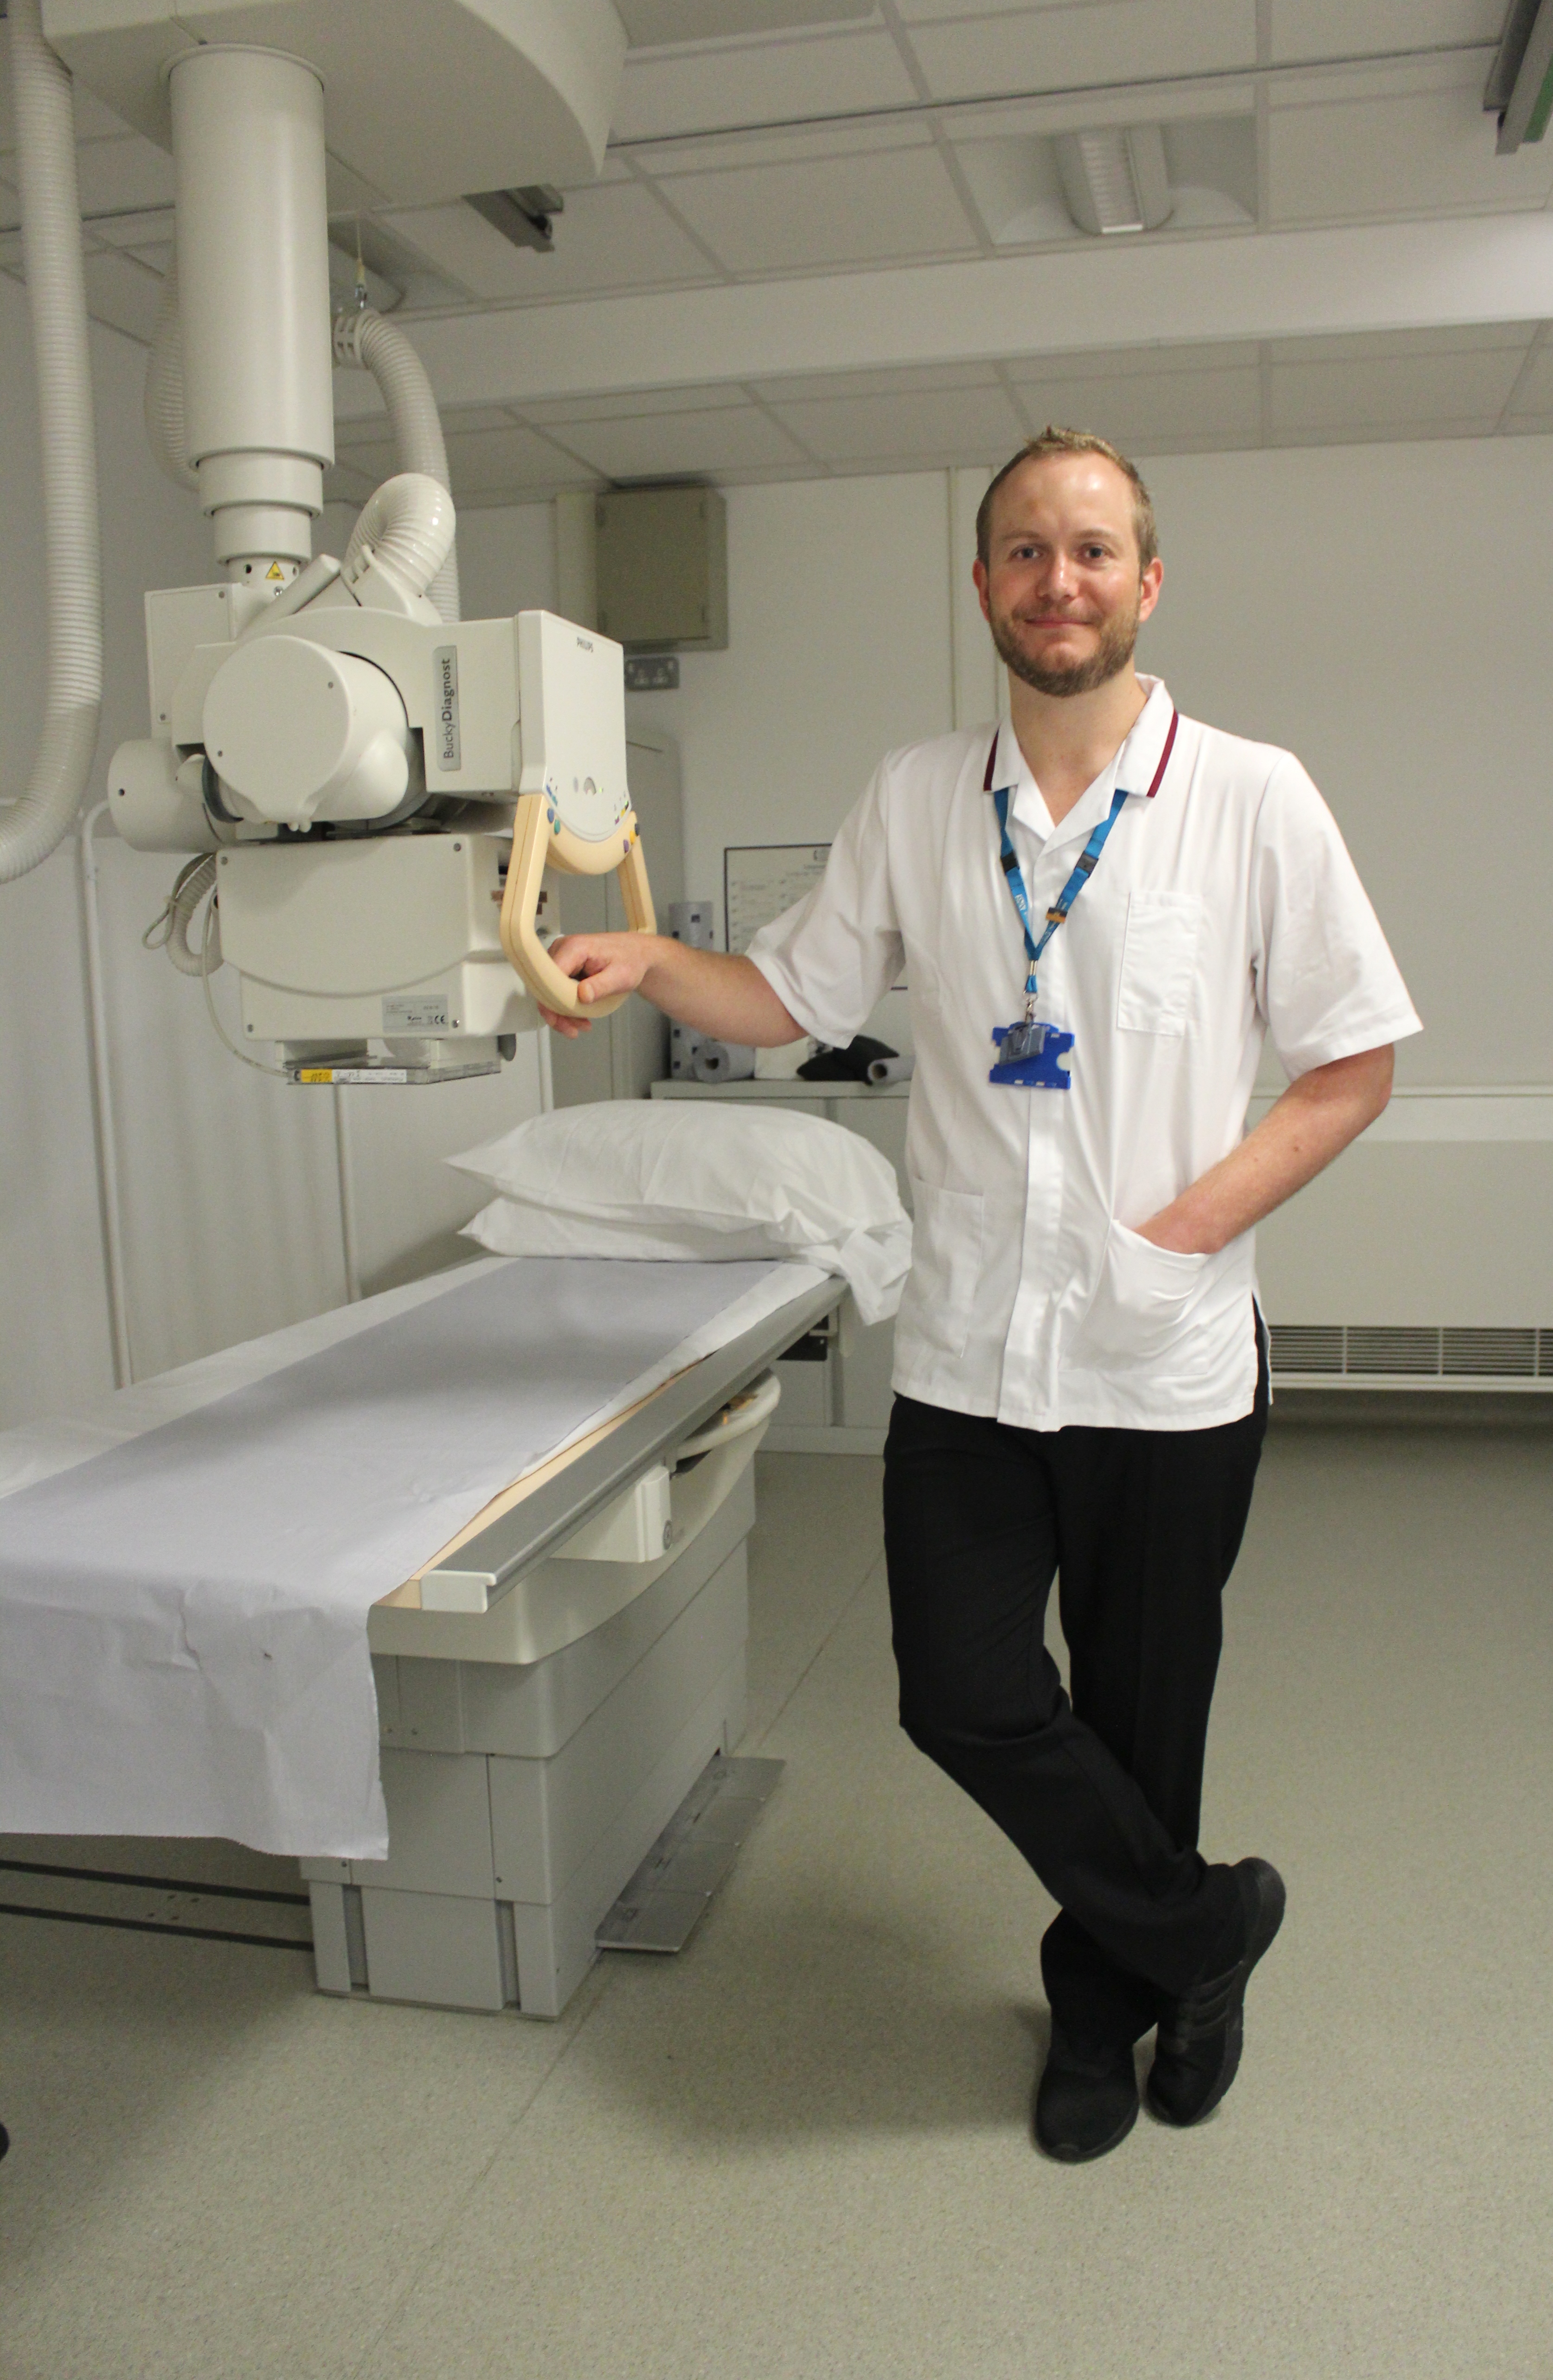 Ed Kirkham, senior radiographer at West Suffolk NHS Foundation Trust, in the reopened X-ray department based at the Thetford Healthy Living Centre.